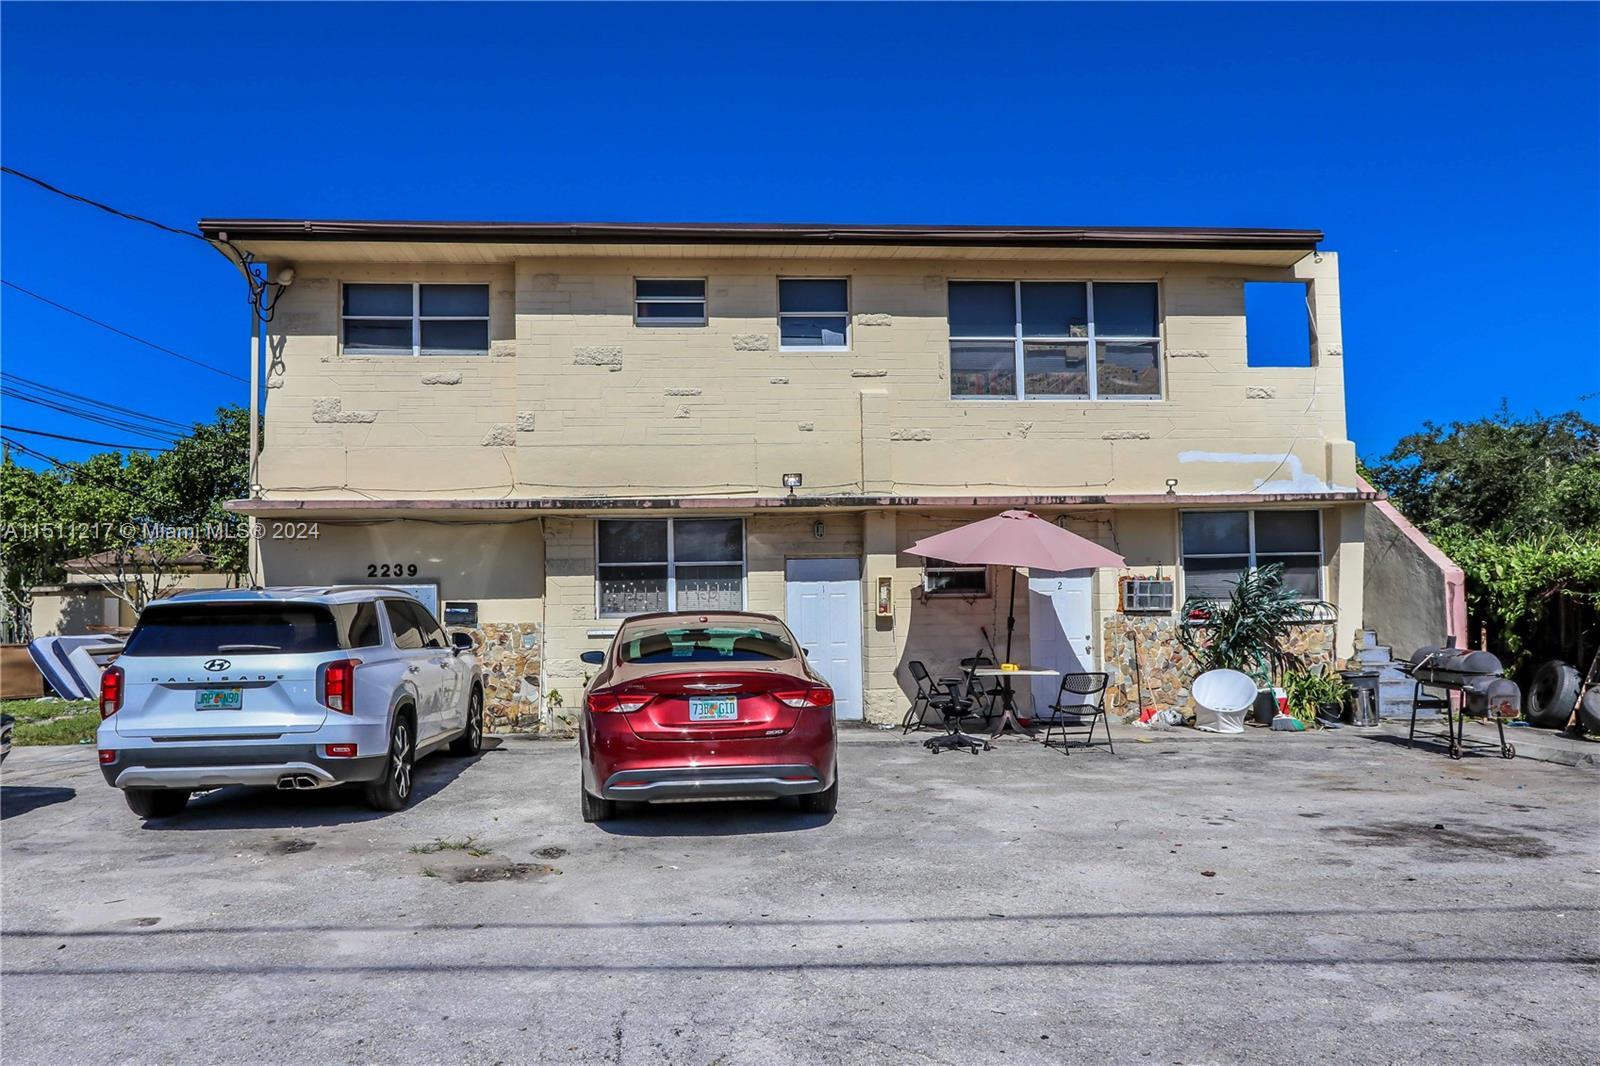 Photo of 2239 NW 87th St in Miami, FL